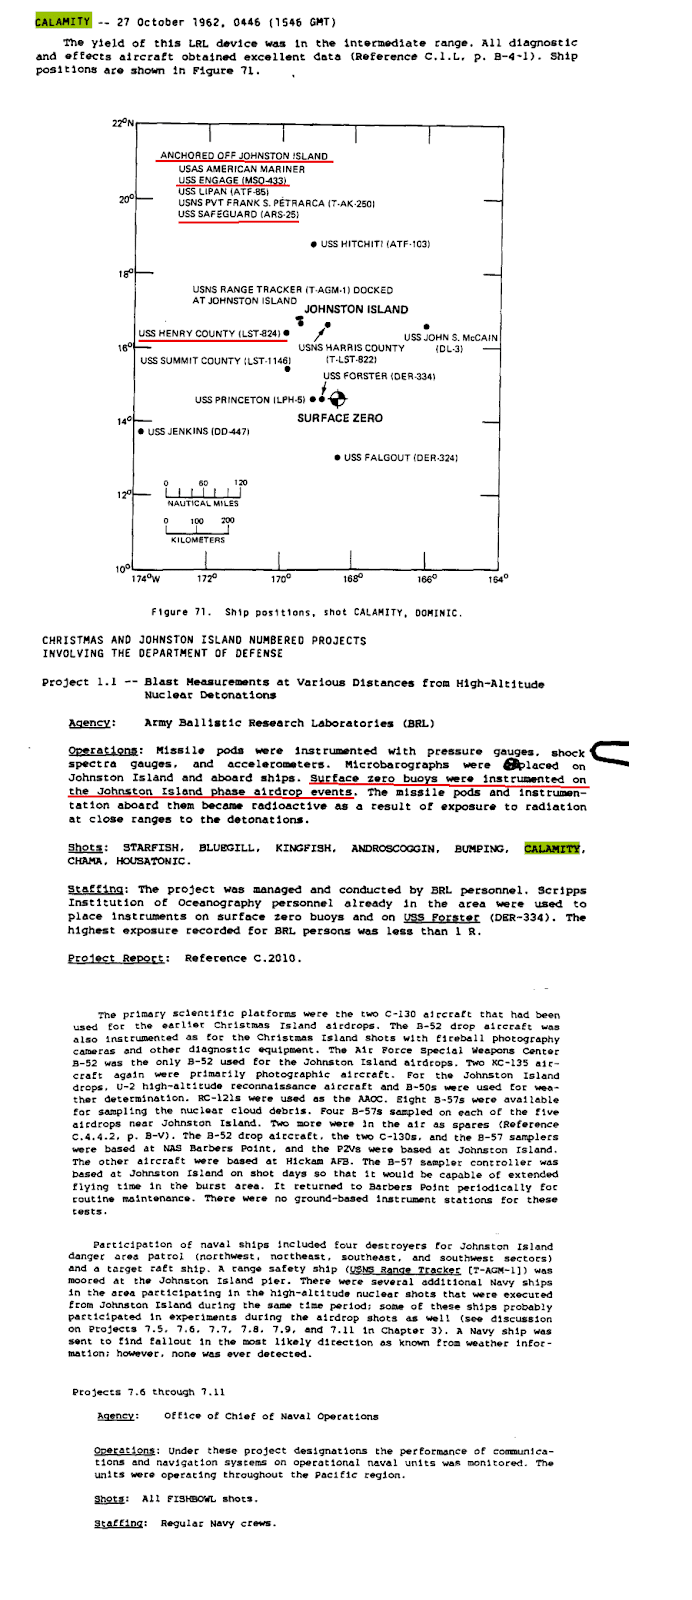 r/UFOB - Details of airdropped nuclear test "CALAMITY" on 27 October 1962 at Johnston Island